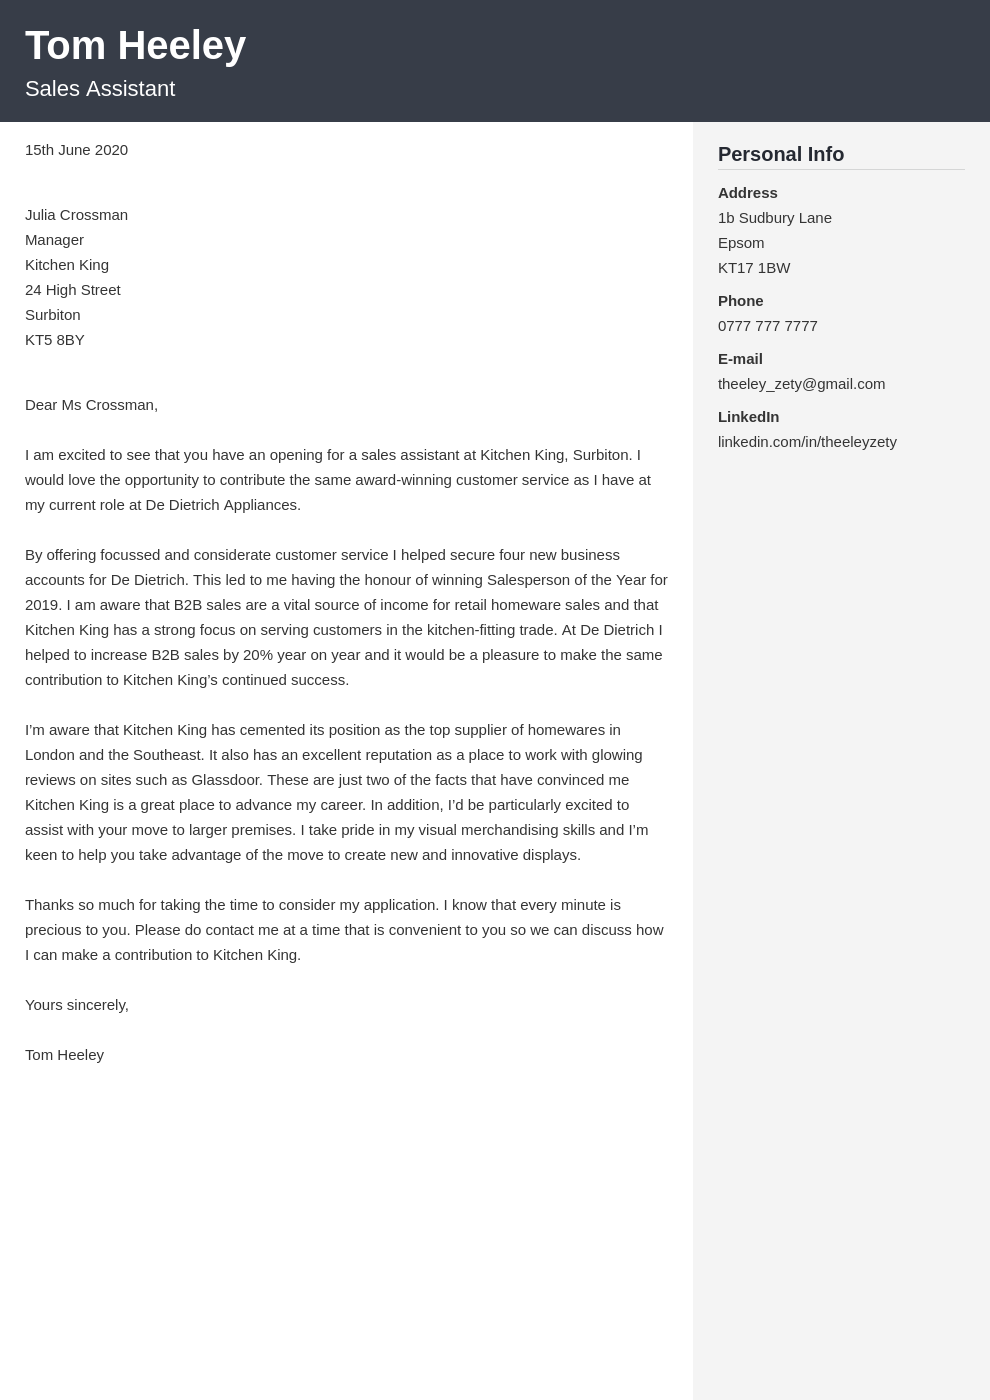 sample cover letter for assistant sales